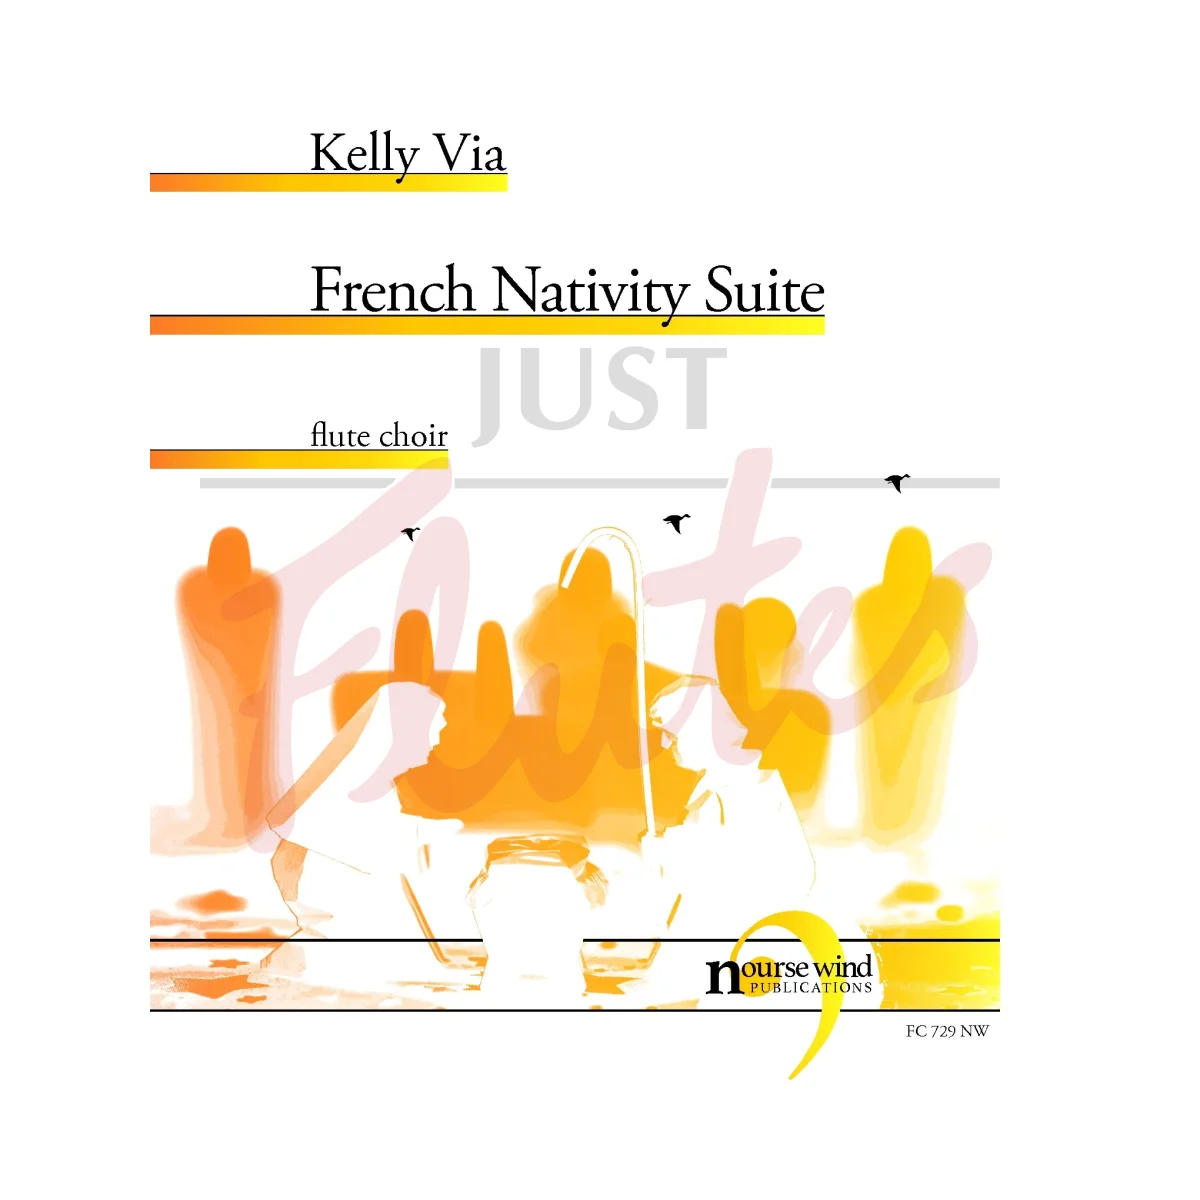 French Nativity Suite arranged for Flute Choir